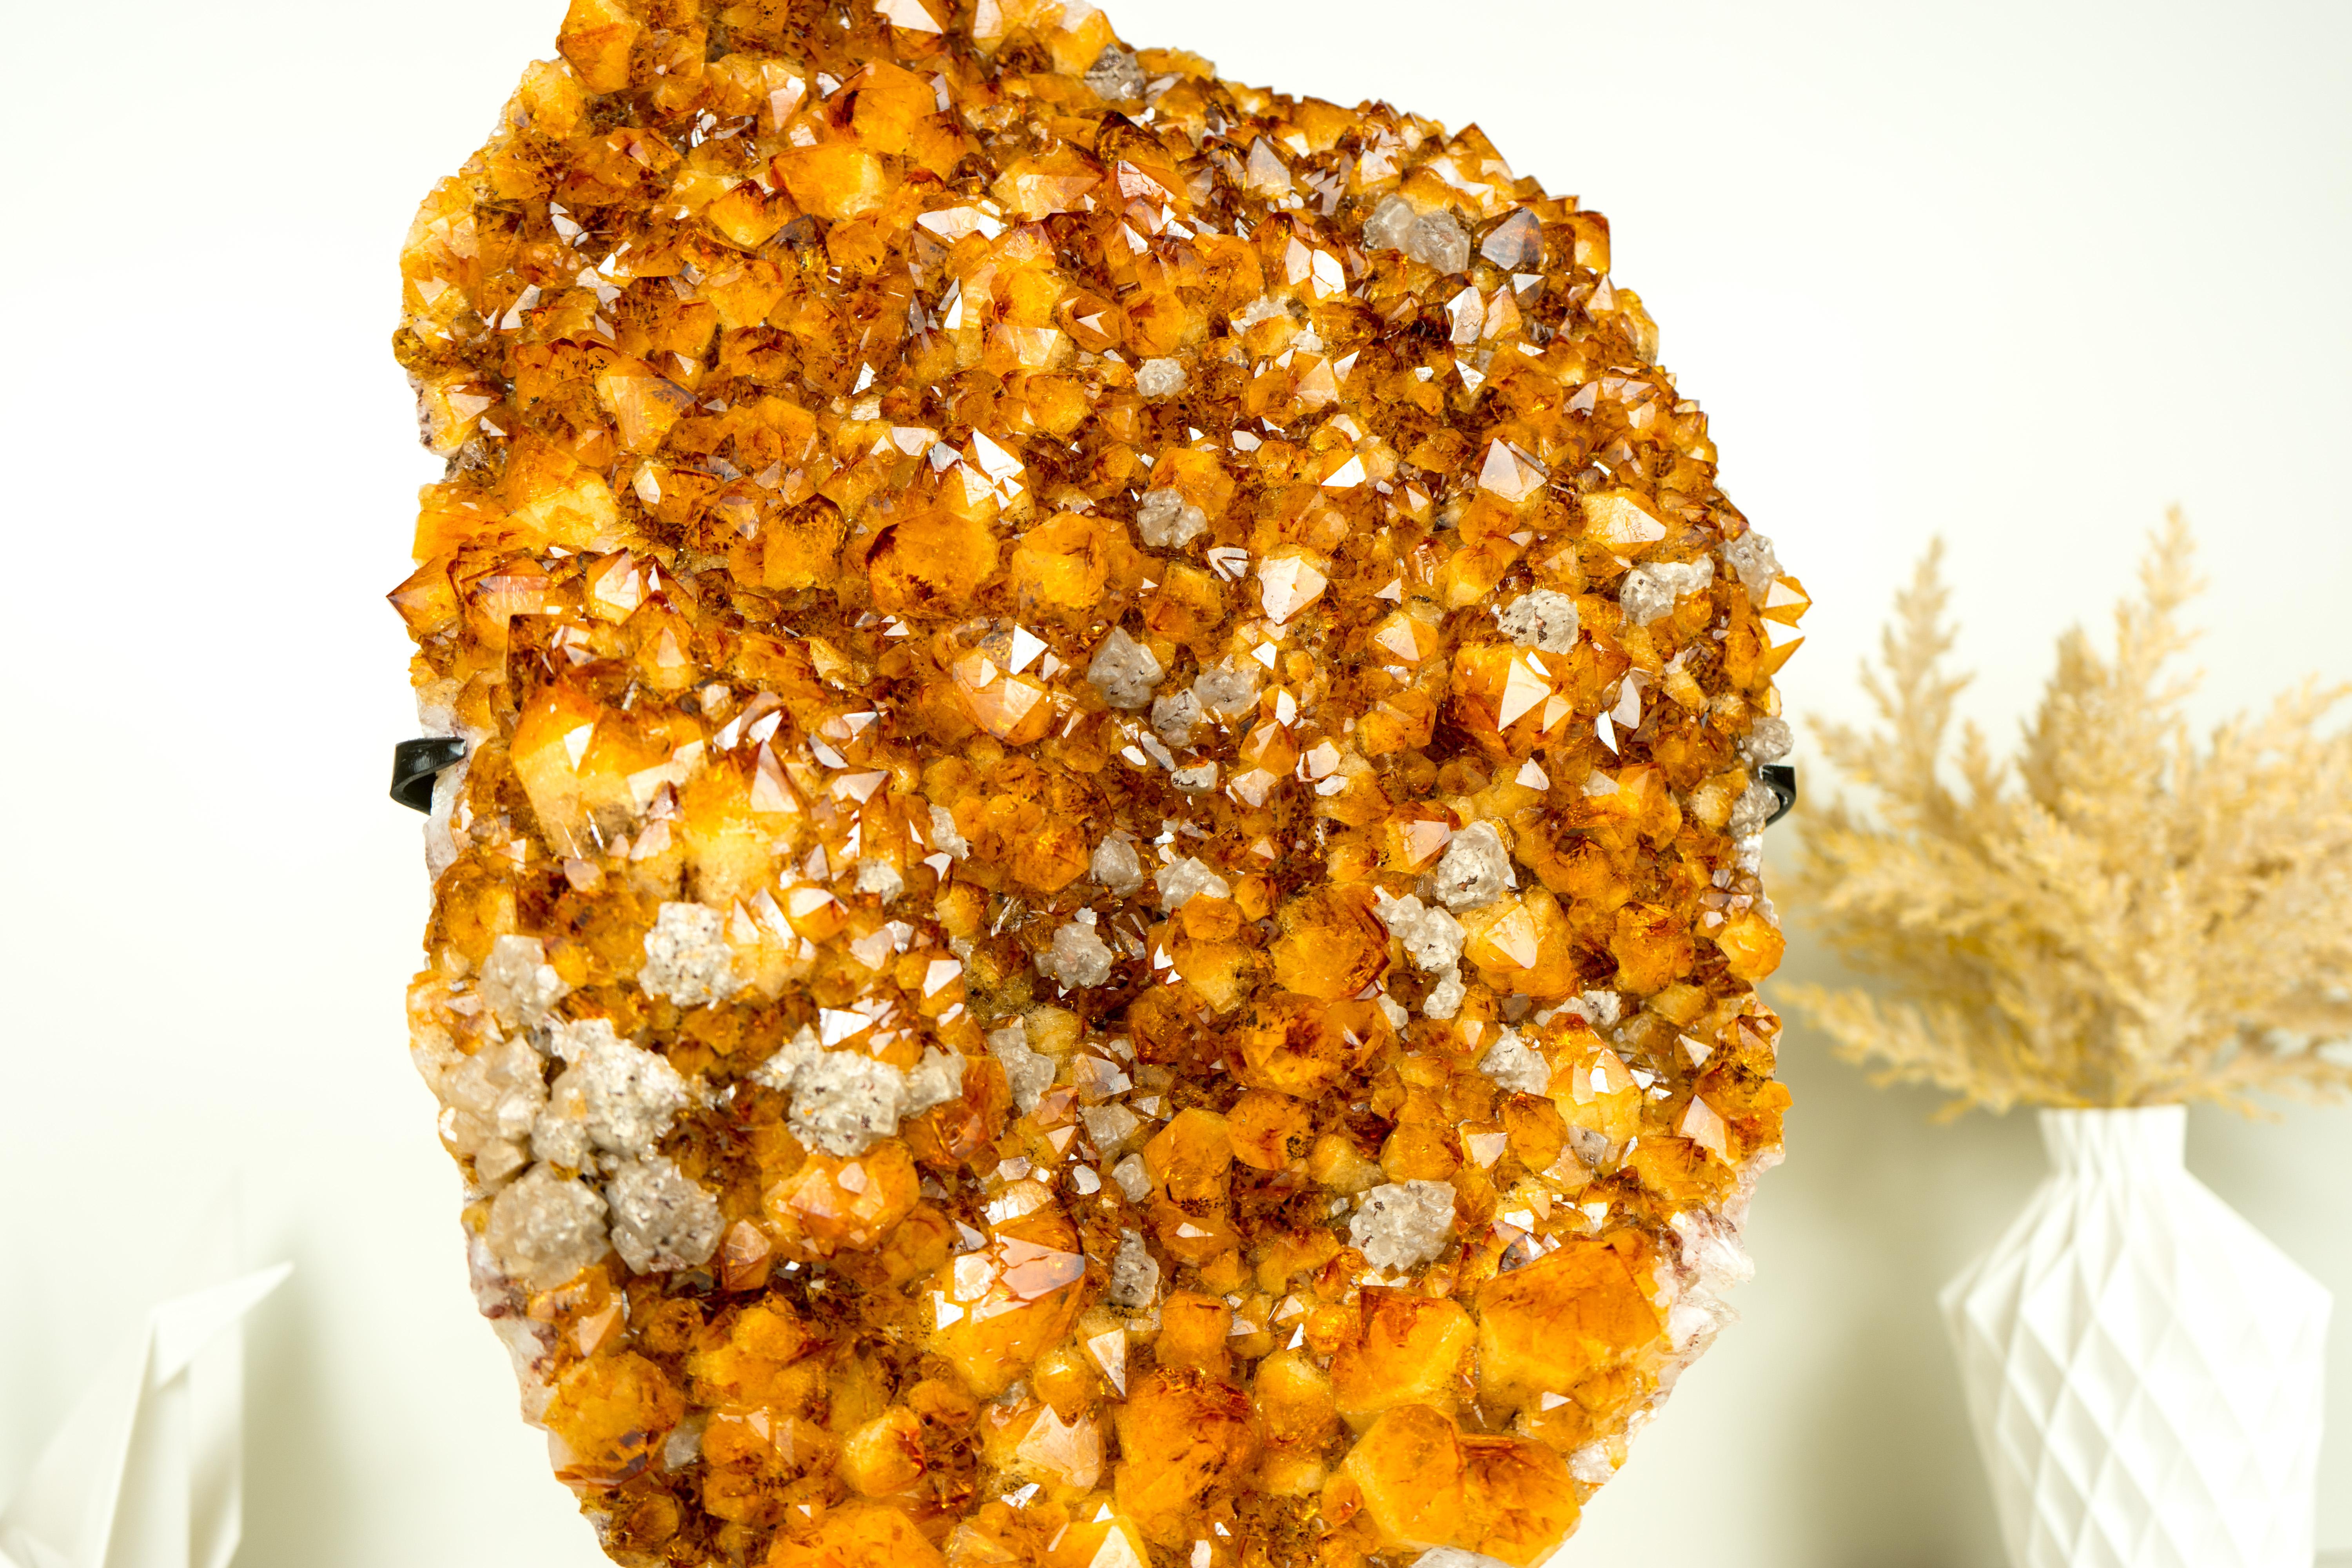 Outstanding in beauty, this Citrine specimen shows us a perfect example of what a Super Extra (AAA Quality) Citrine should look like. It brings us a Deep Orange color tone and the Intact points are clustered on a crown format, making the orange